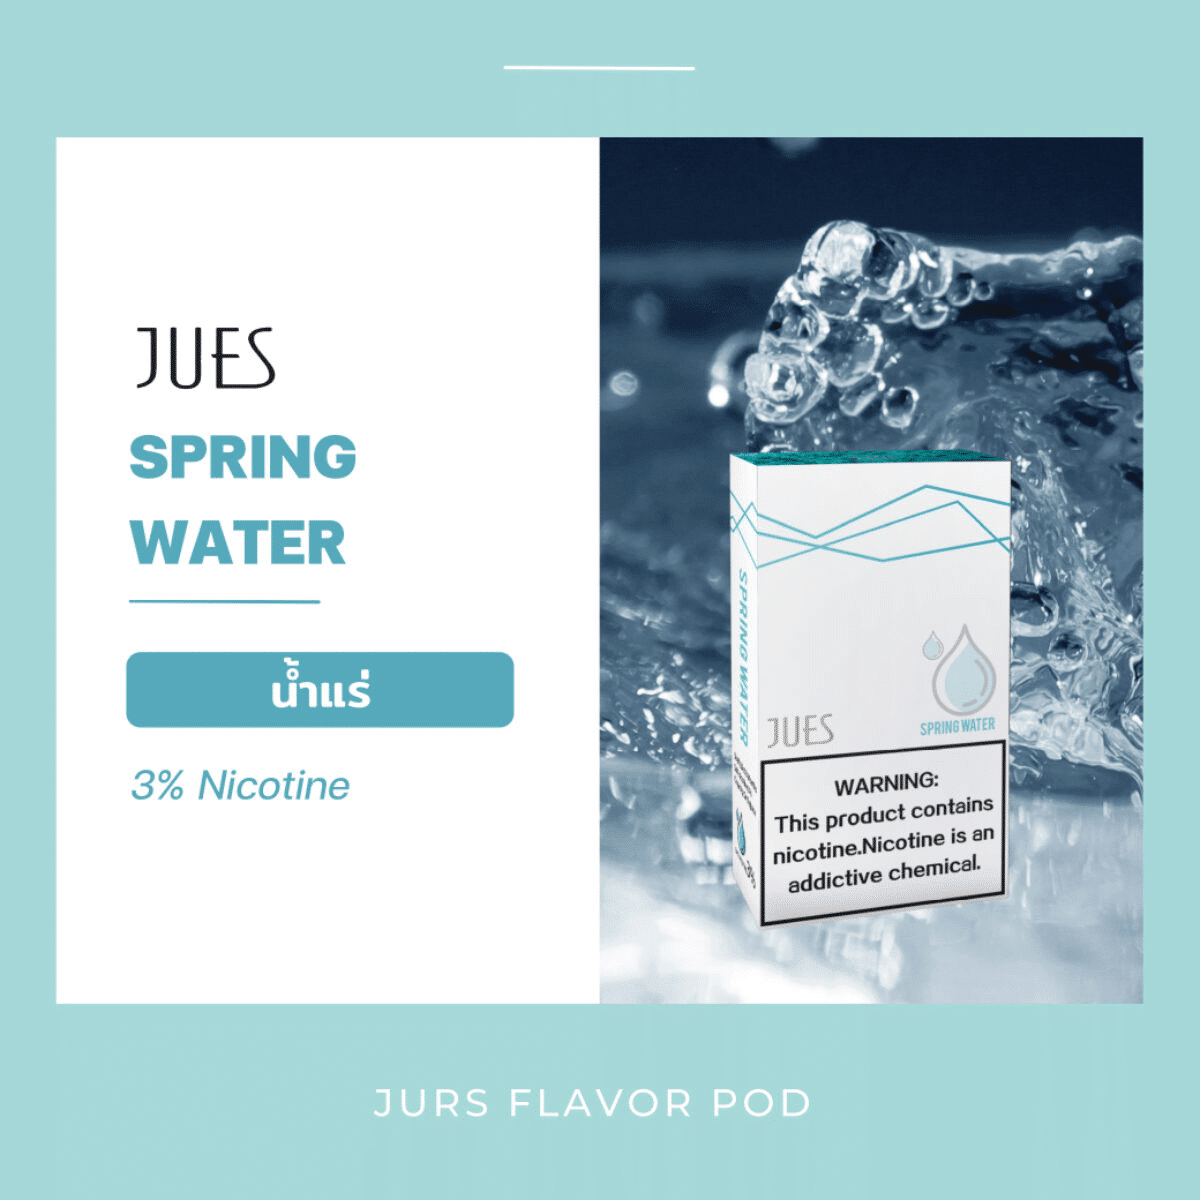 JUES POD mineral water